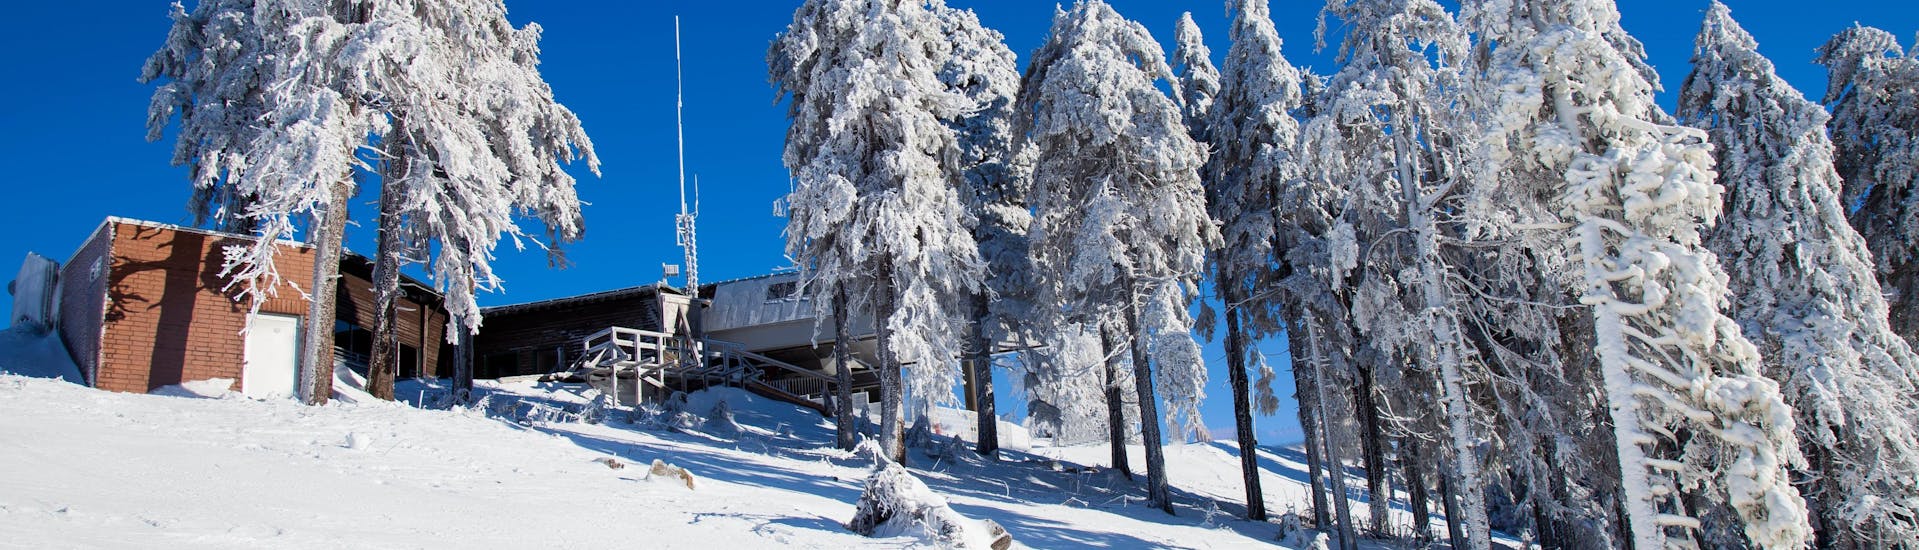 An image of the top station of the Wurmberg gondola in Braunlage, a popular ski resort in the Harz mountains where local ski schools offer ski lessons for visitors who are eager to learn to ski.